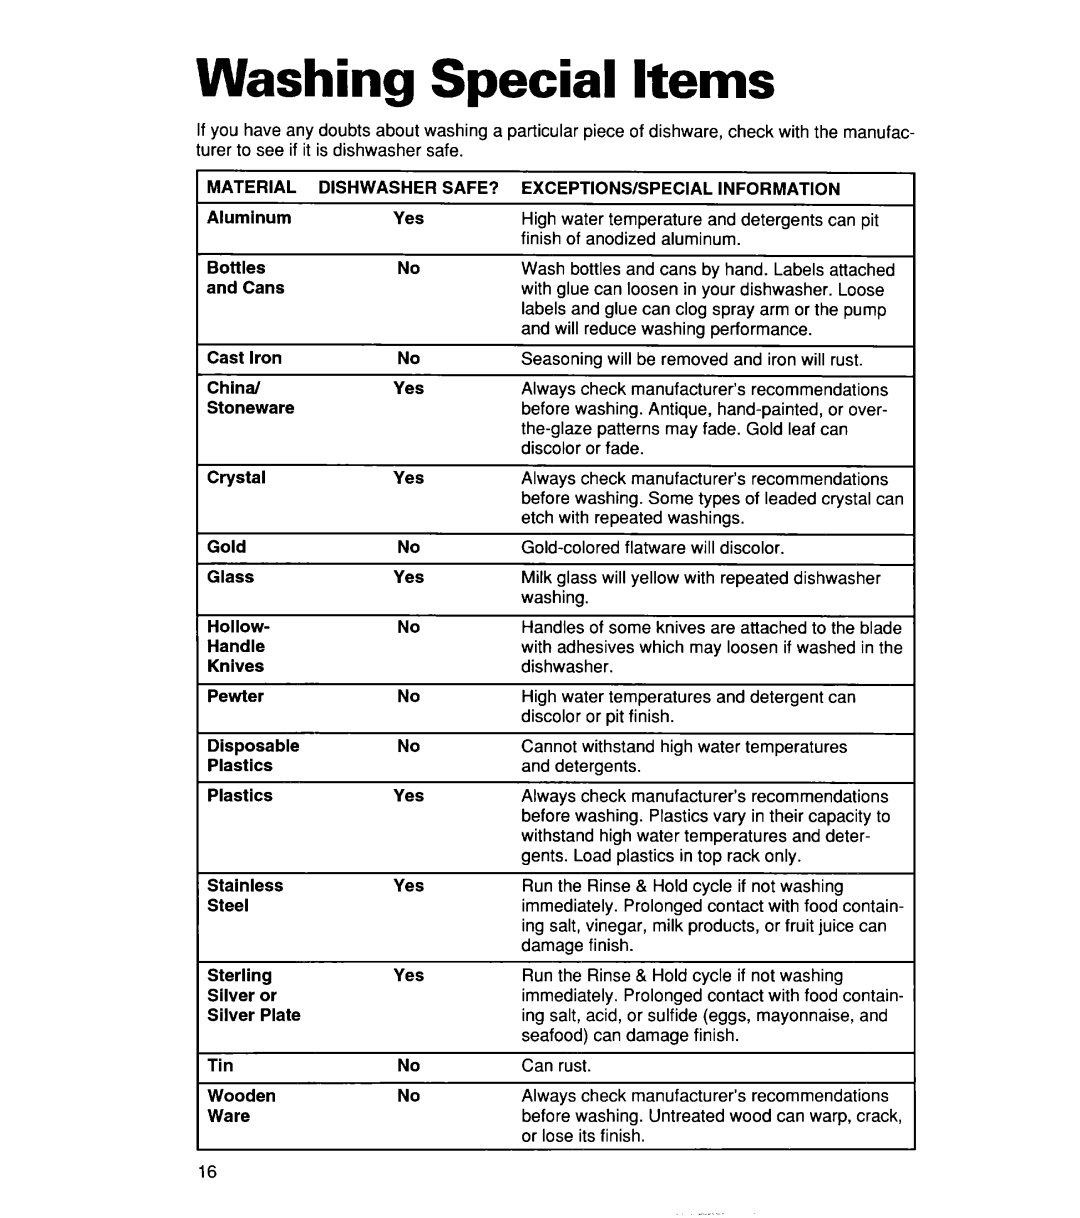 Whirlpool 806, Series 400, 830 warranty Washing Special Items 